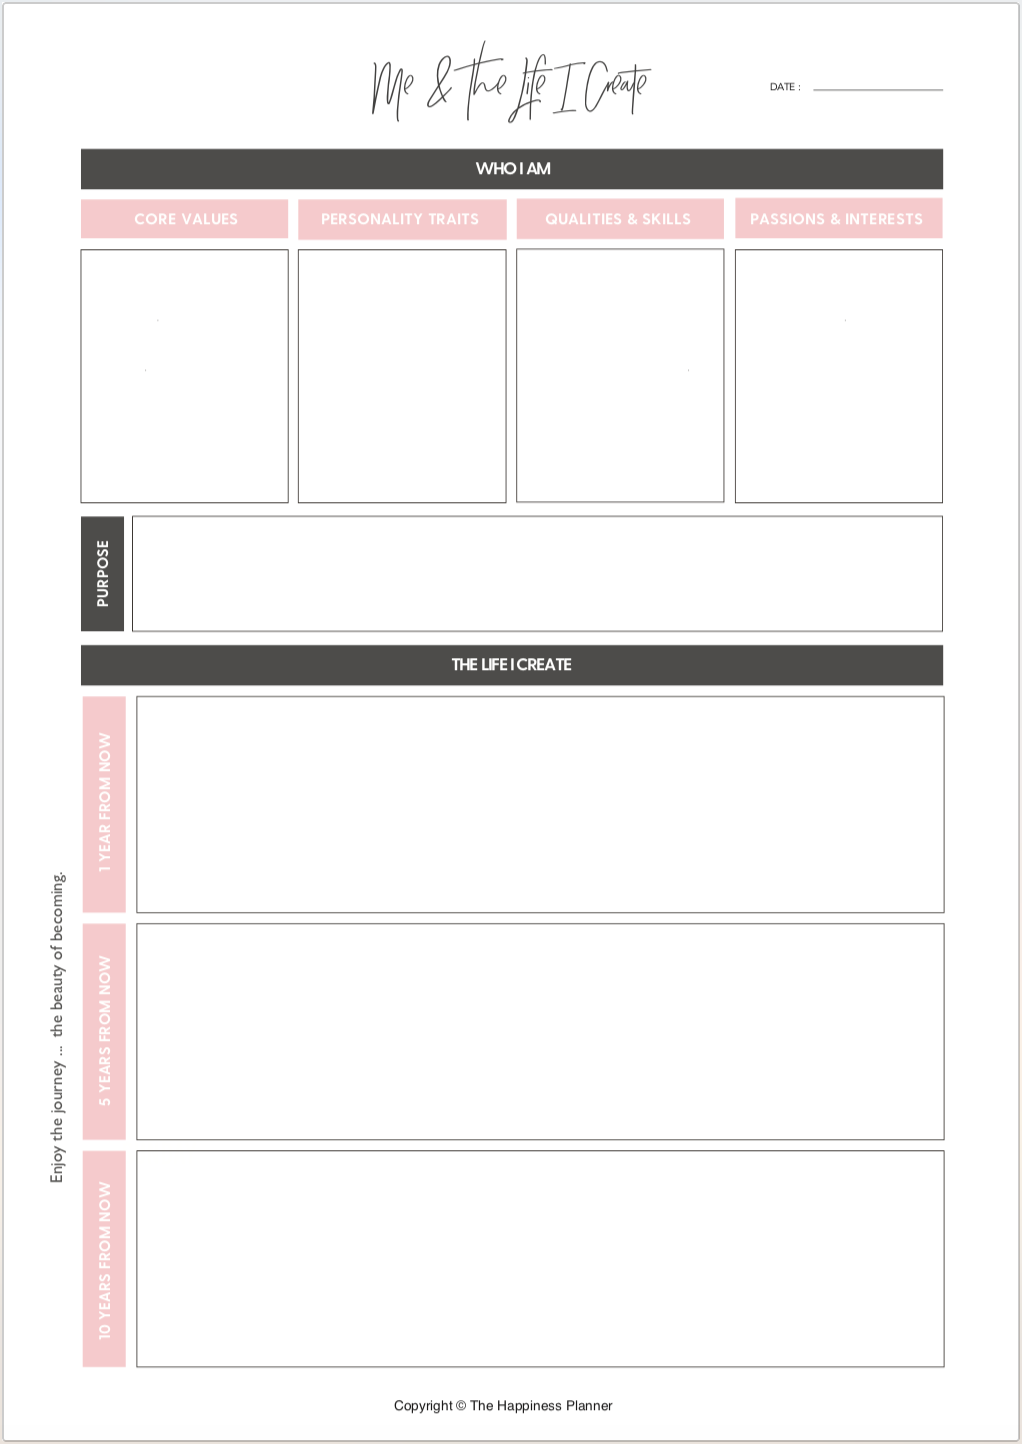 Printables: #Goals I - The Happiness Planner®